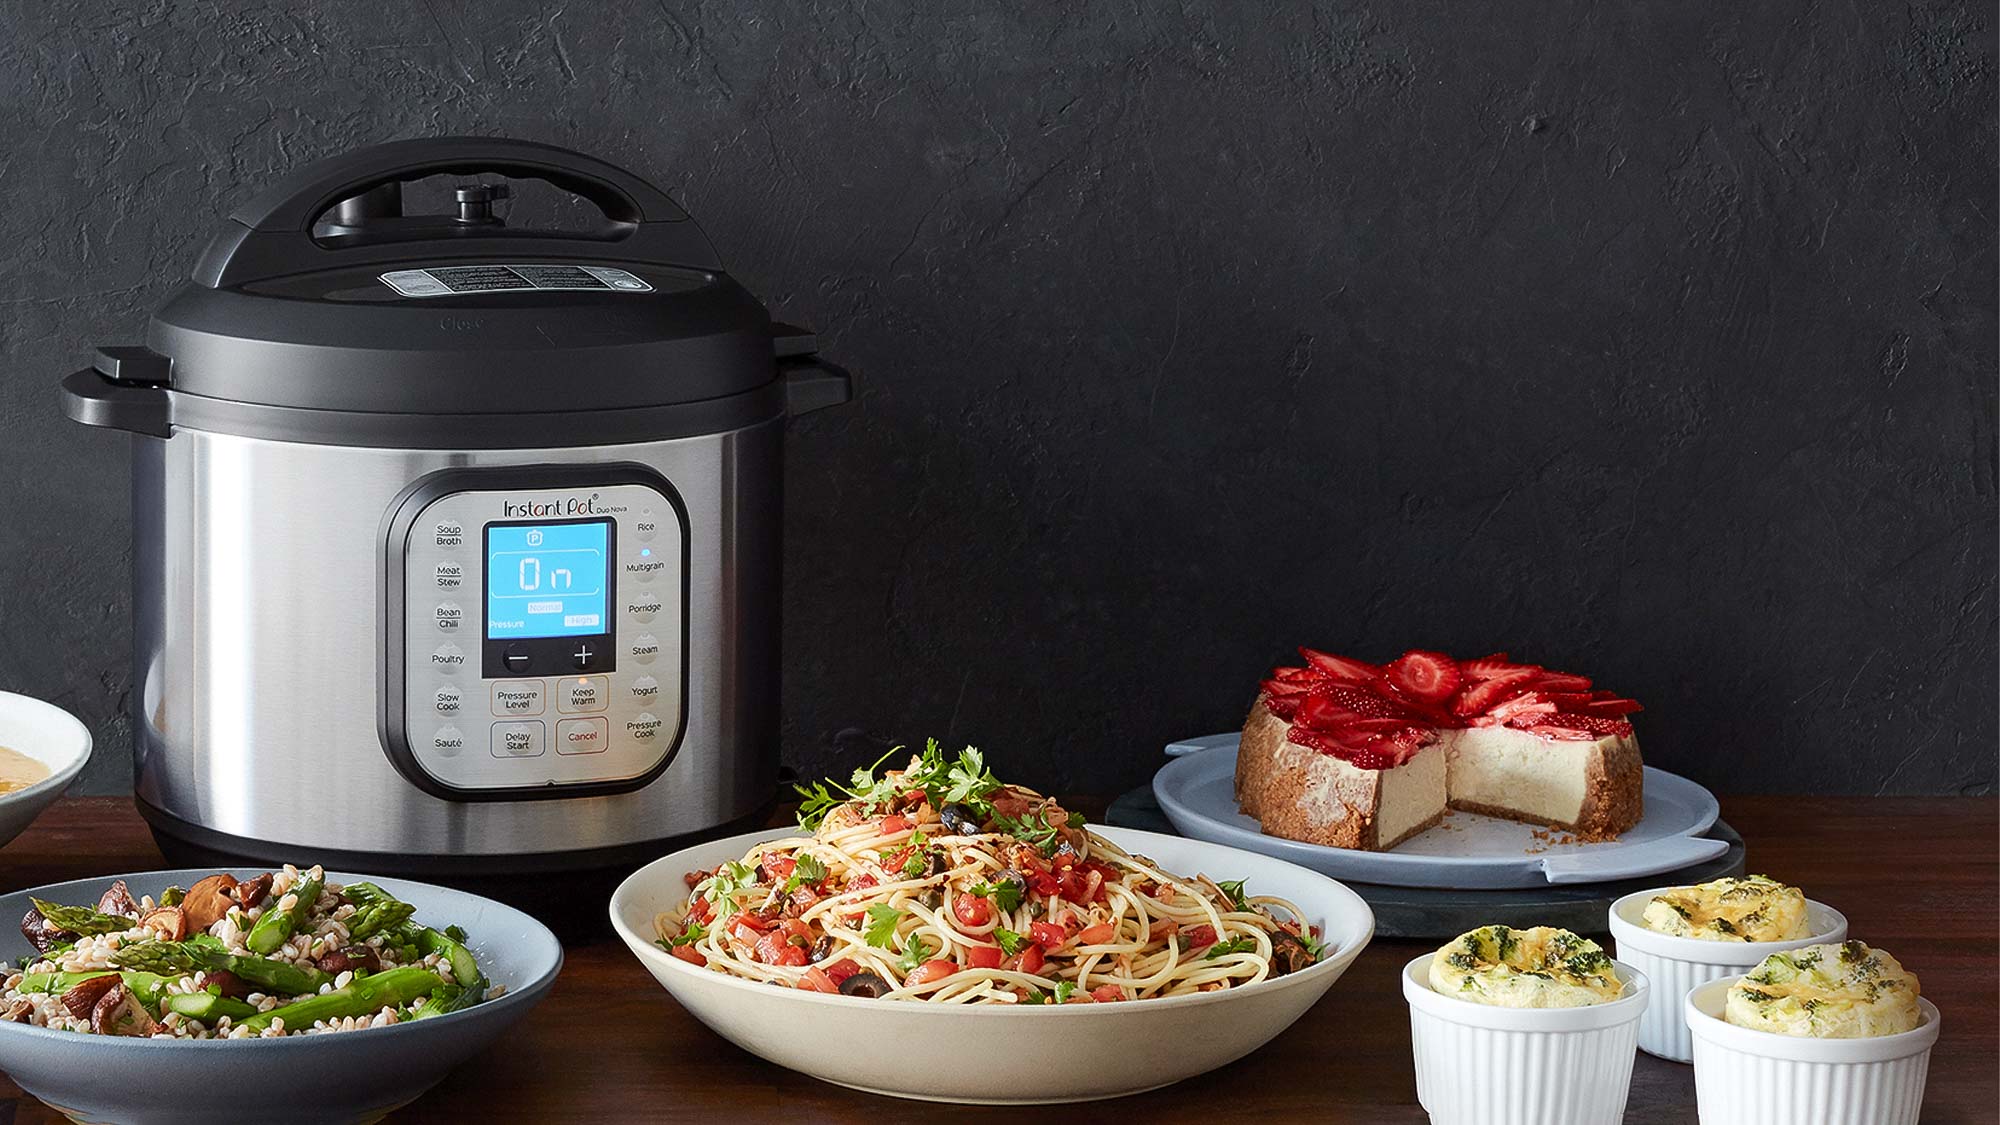 Instant Pot Duo Nova on the kitchen counter